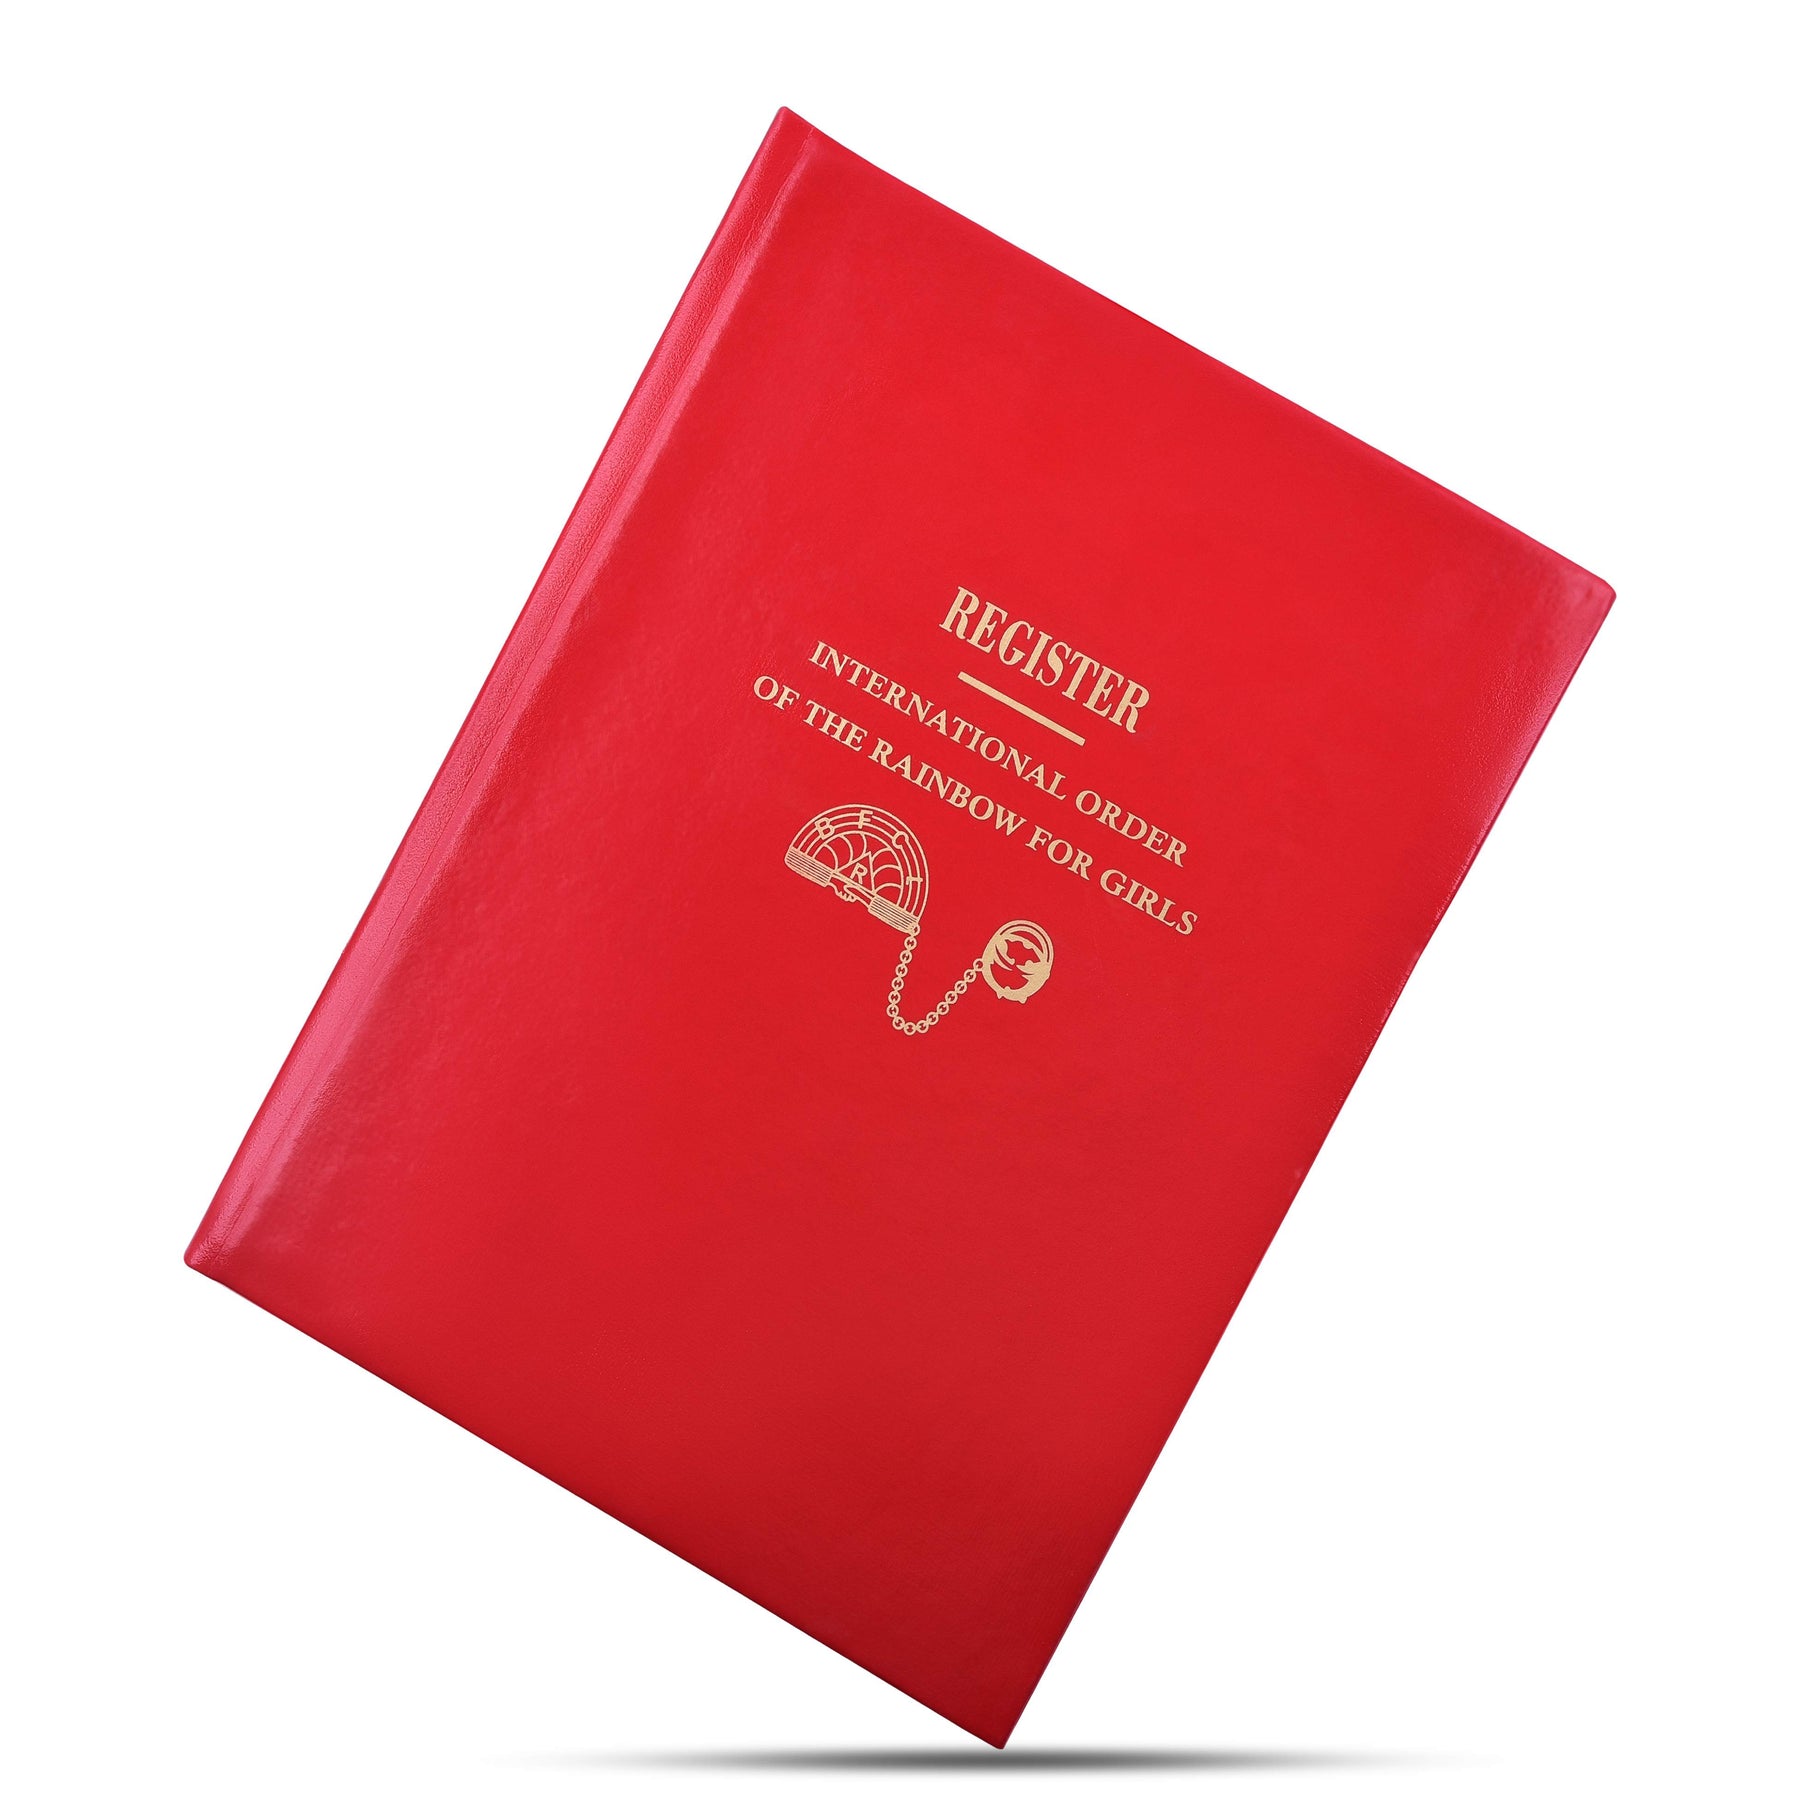 International Order of The Tainbow For Girls Register - Red Cover With Customizable Pages - Bricks Masons